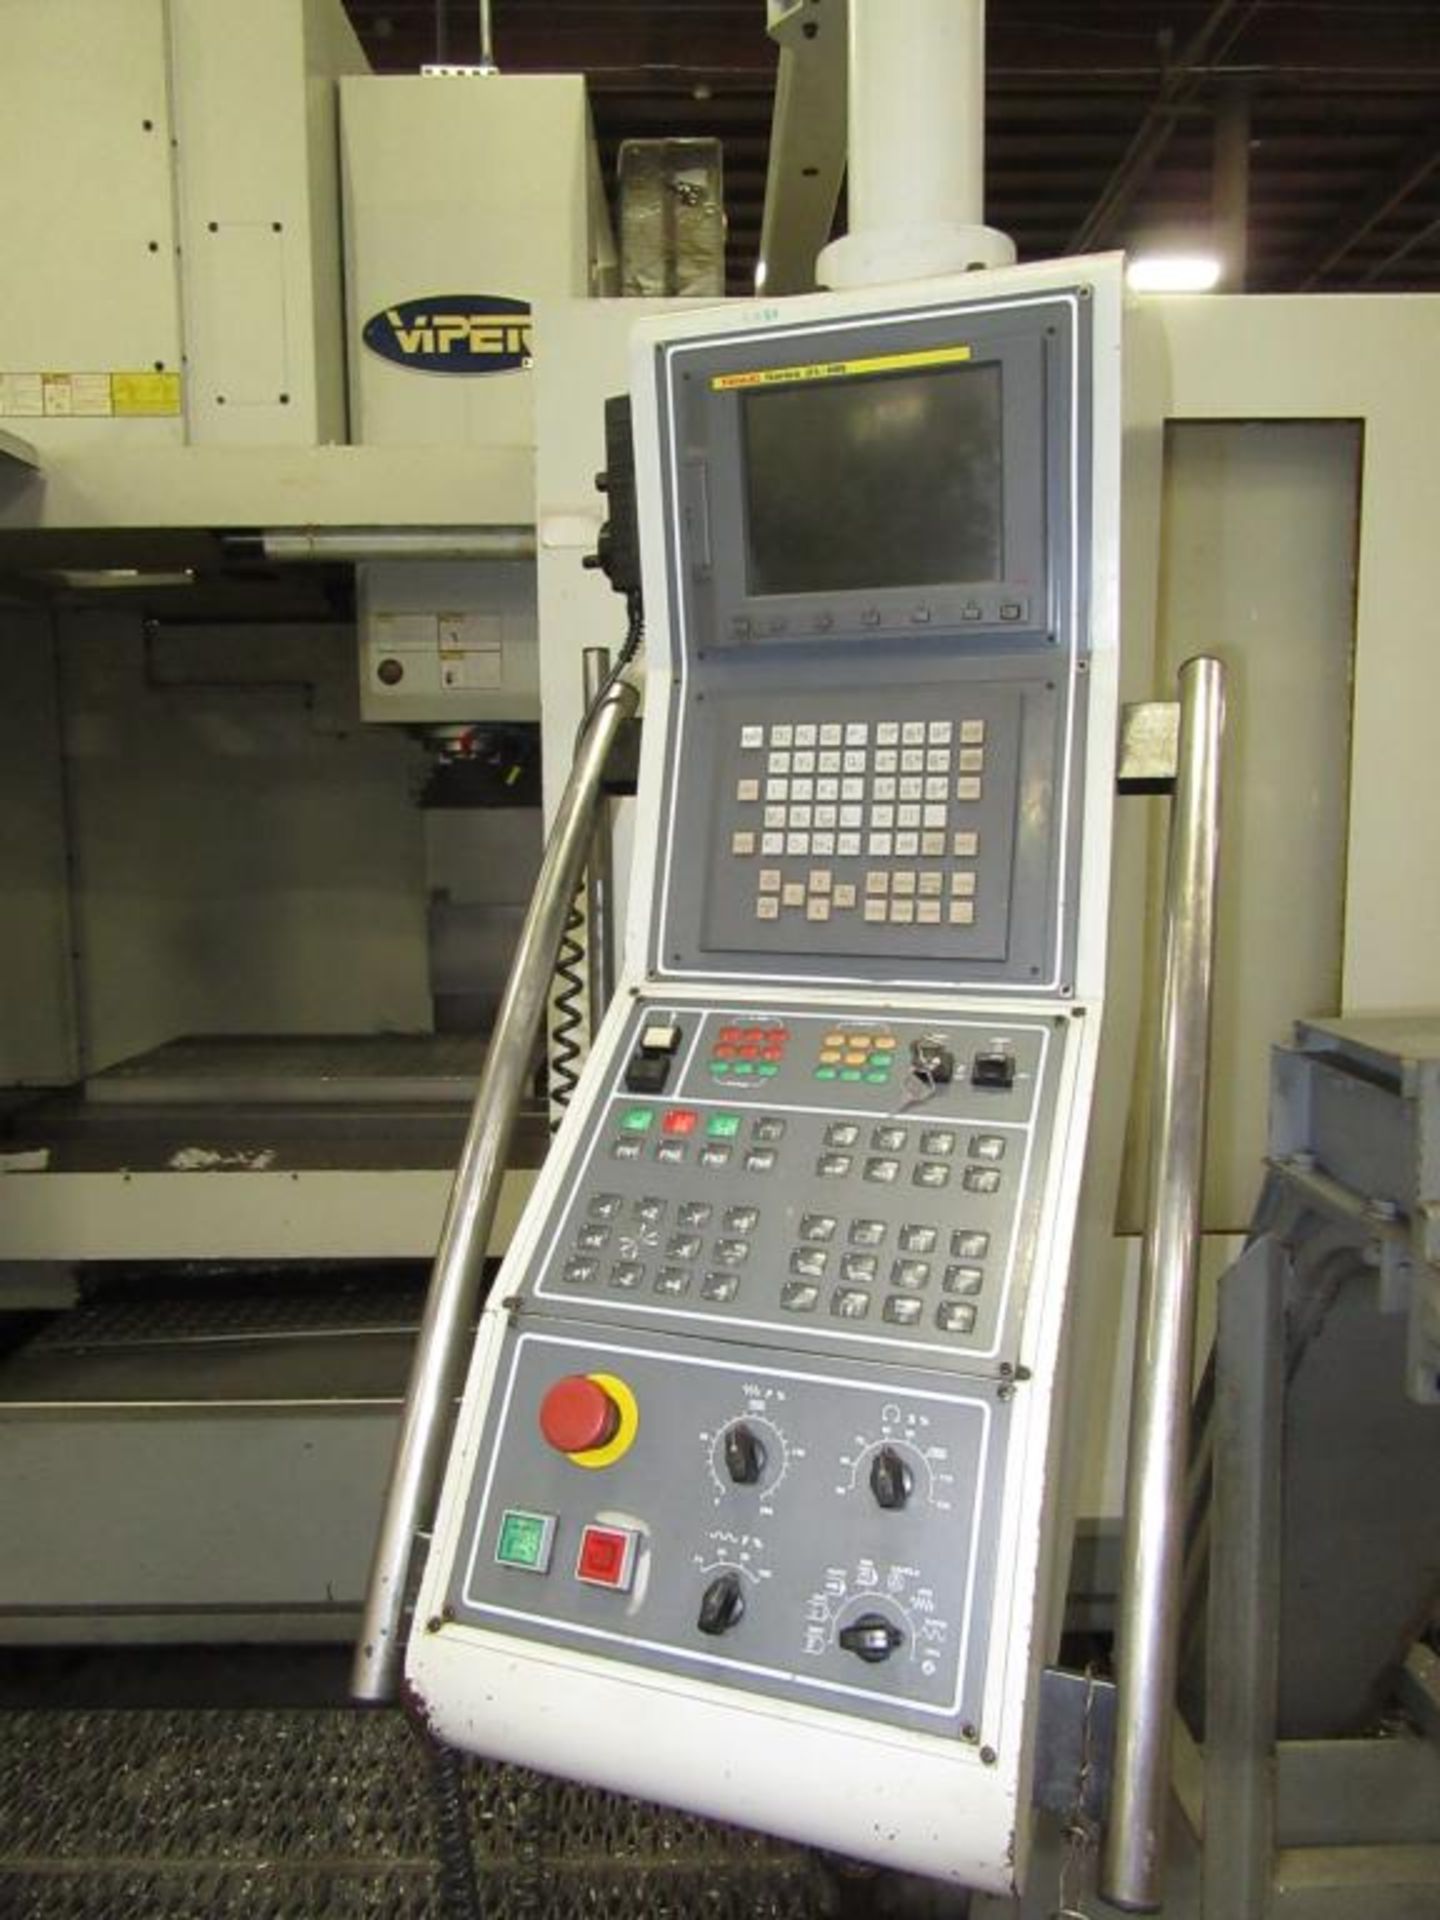 Mighty Viper VMC-1600A. 2006 - CNC Vertical Machining Center with Fanuc 21i-MB 3-Axis Control Panel, - Image 5 of 22